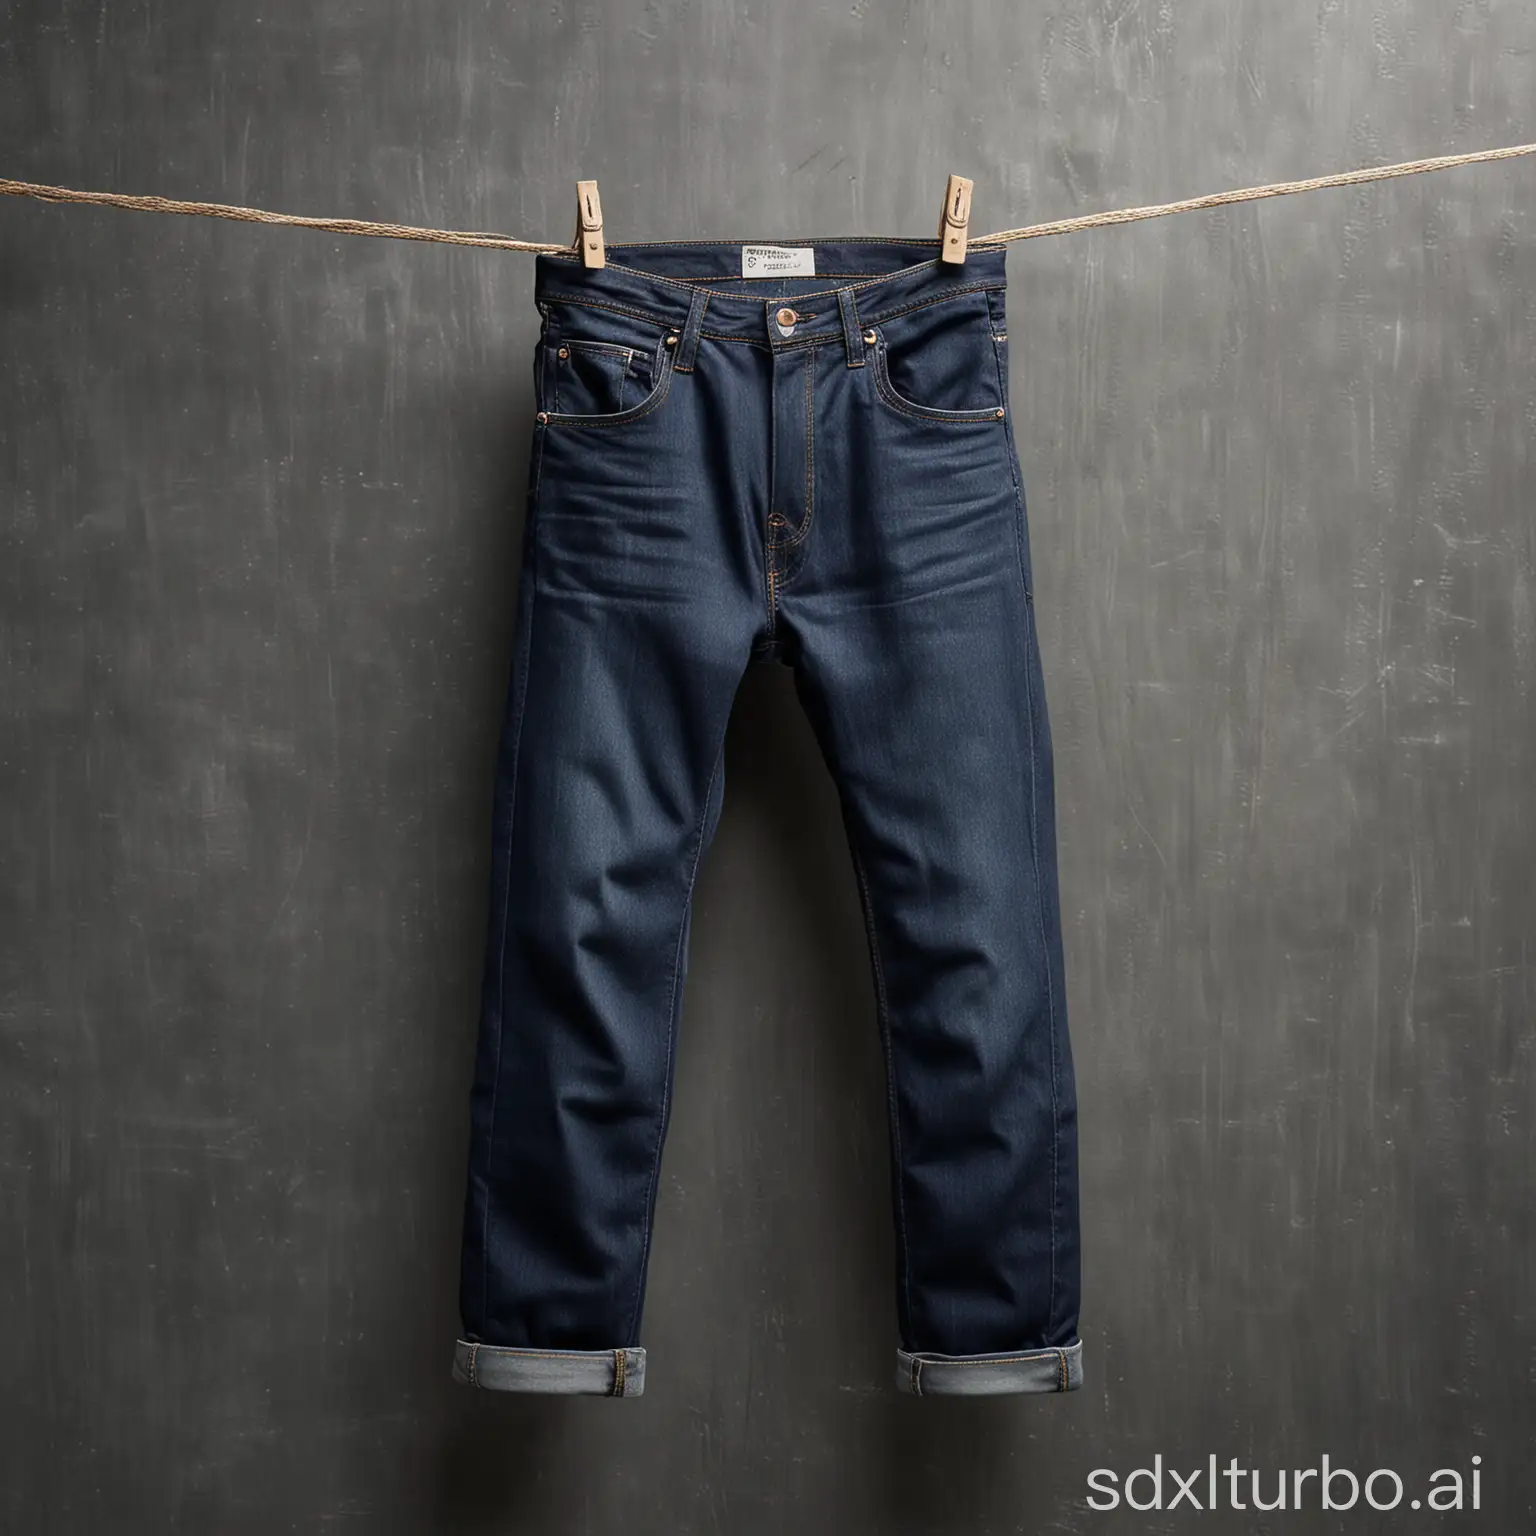 Classic-Dark-Blue-Jeans-Hanging-on-Clothesline